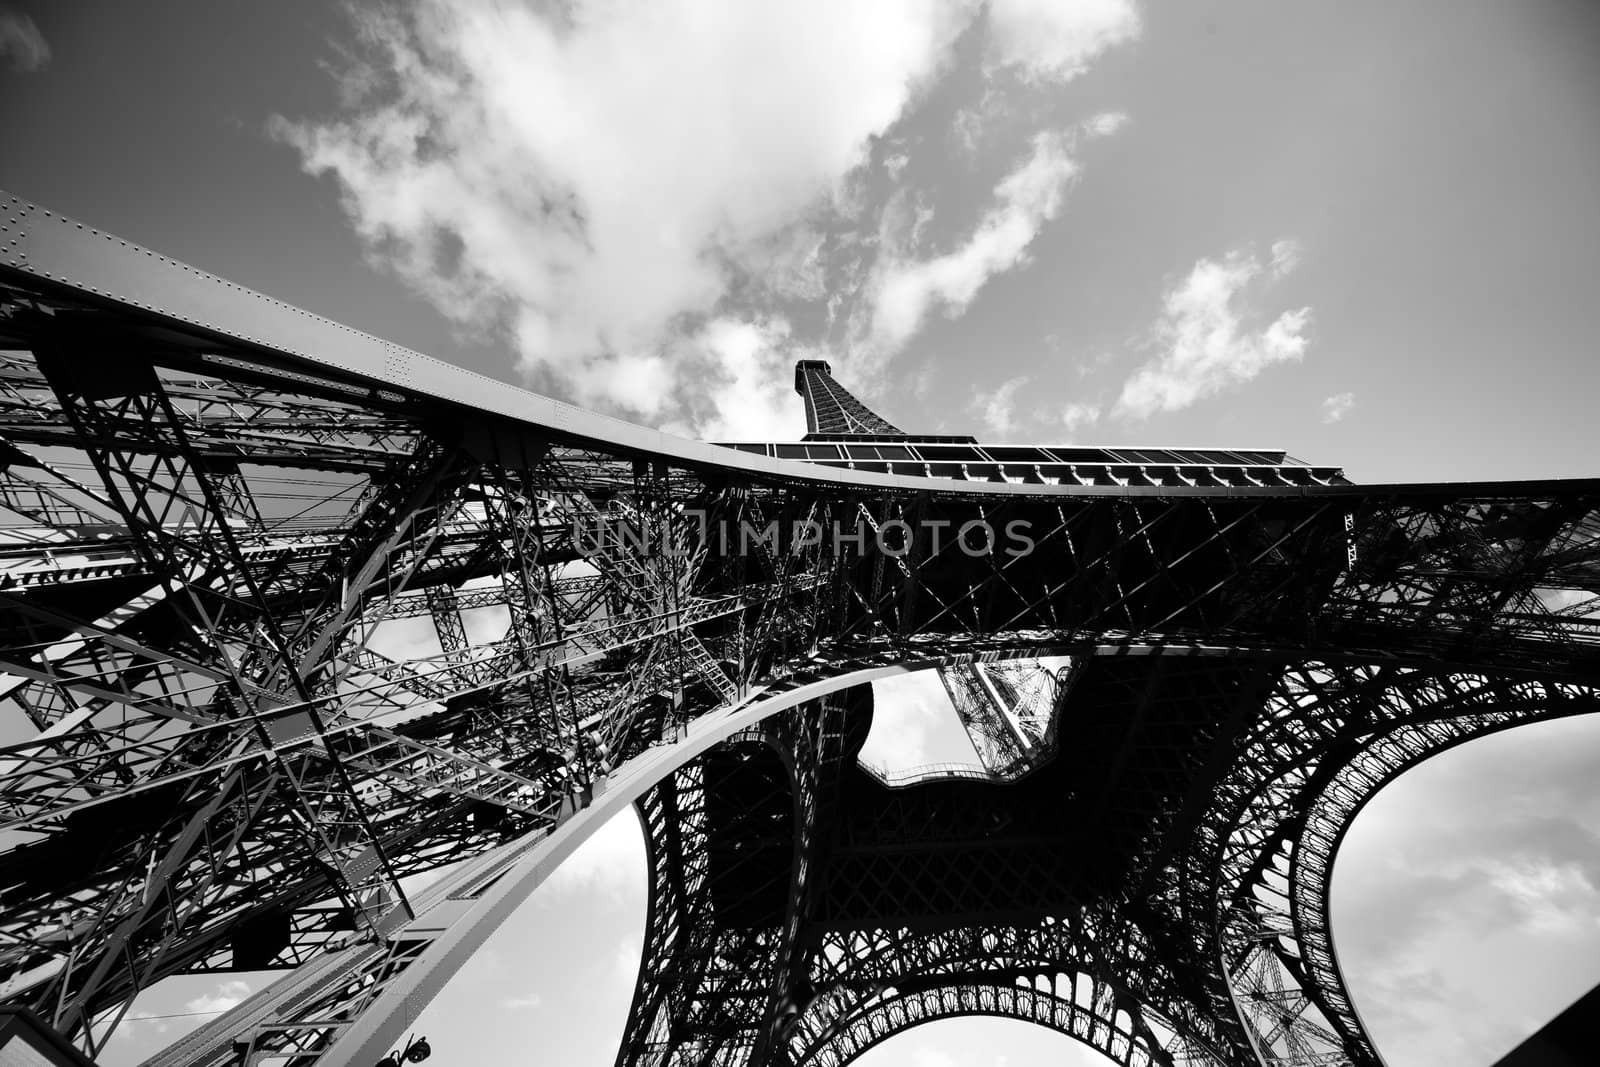 Eiffel Tower from the bottom. Paris, France by furzyk73